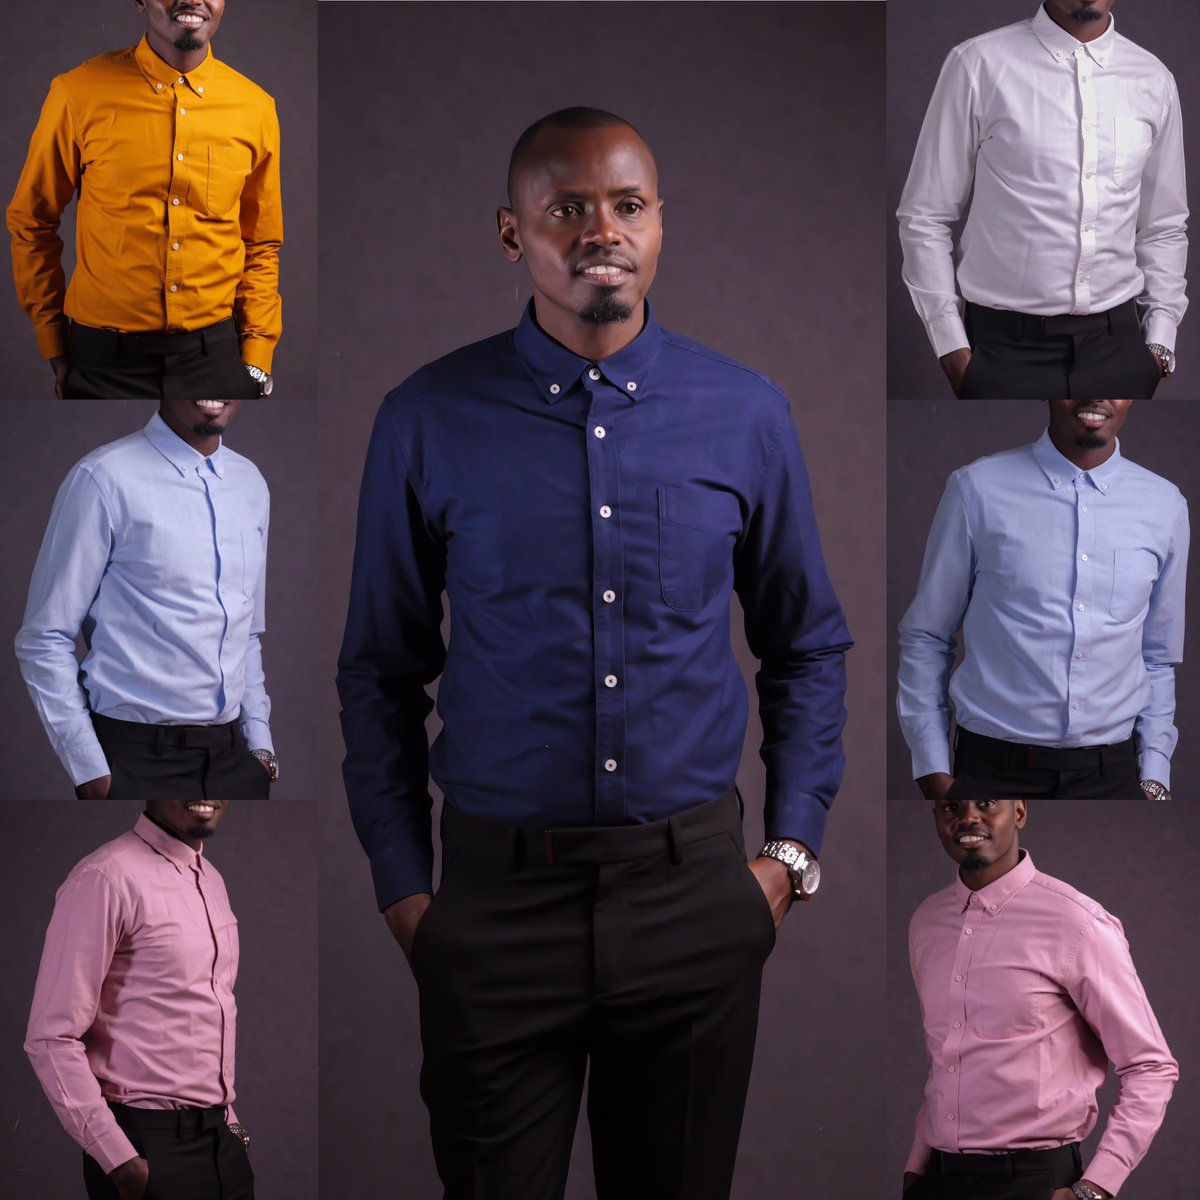 Shirts you can wear with or without a tie. Available in stock. Call/WhatsApp 0723453479 to order. #formalshirts #casualshirts #niceshirts